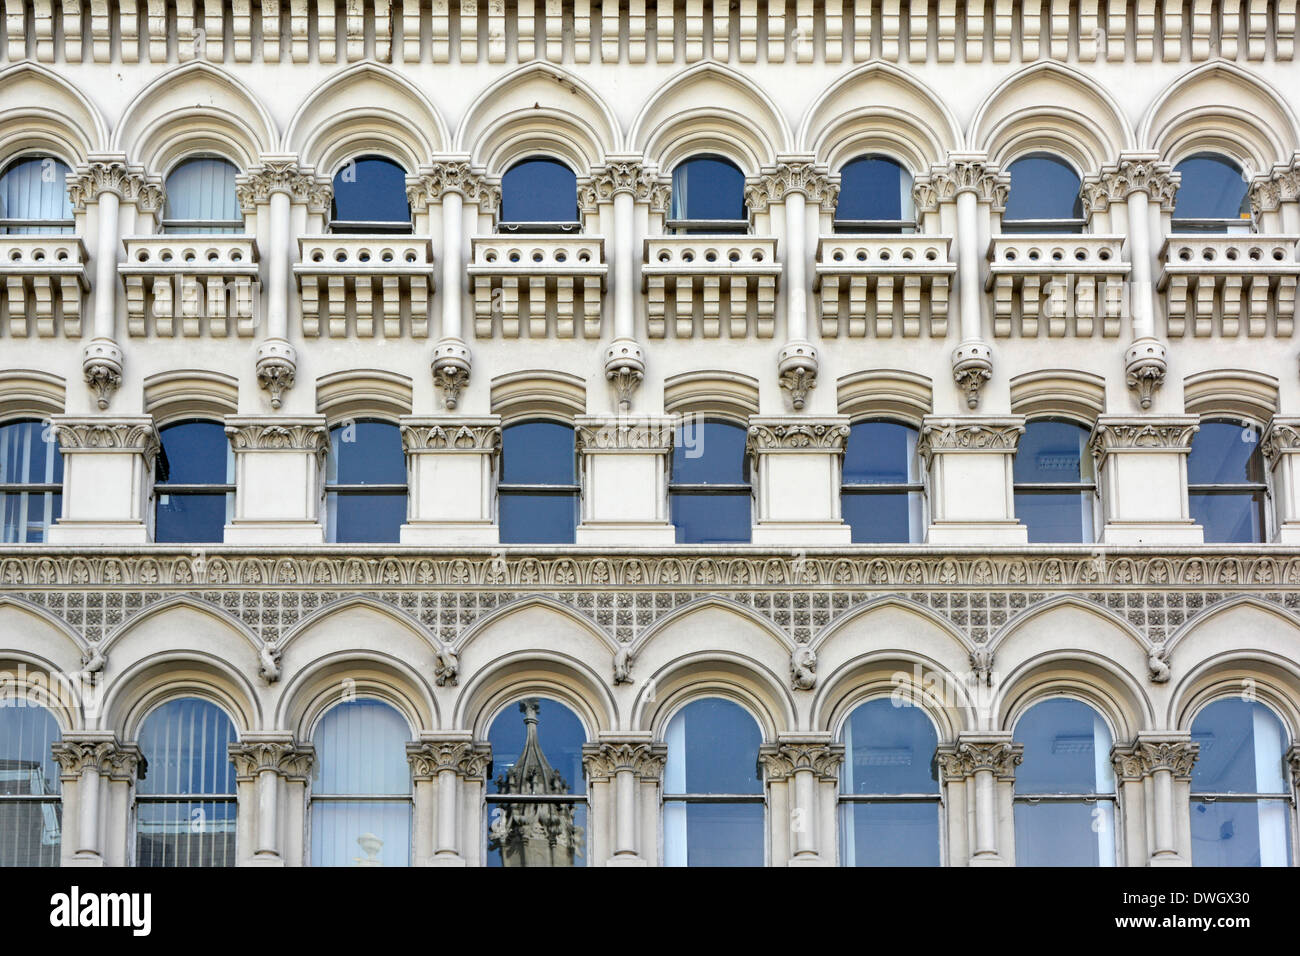 Series of repeated window arches on office building façade in The City of London England UK Stock Photo